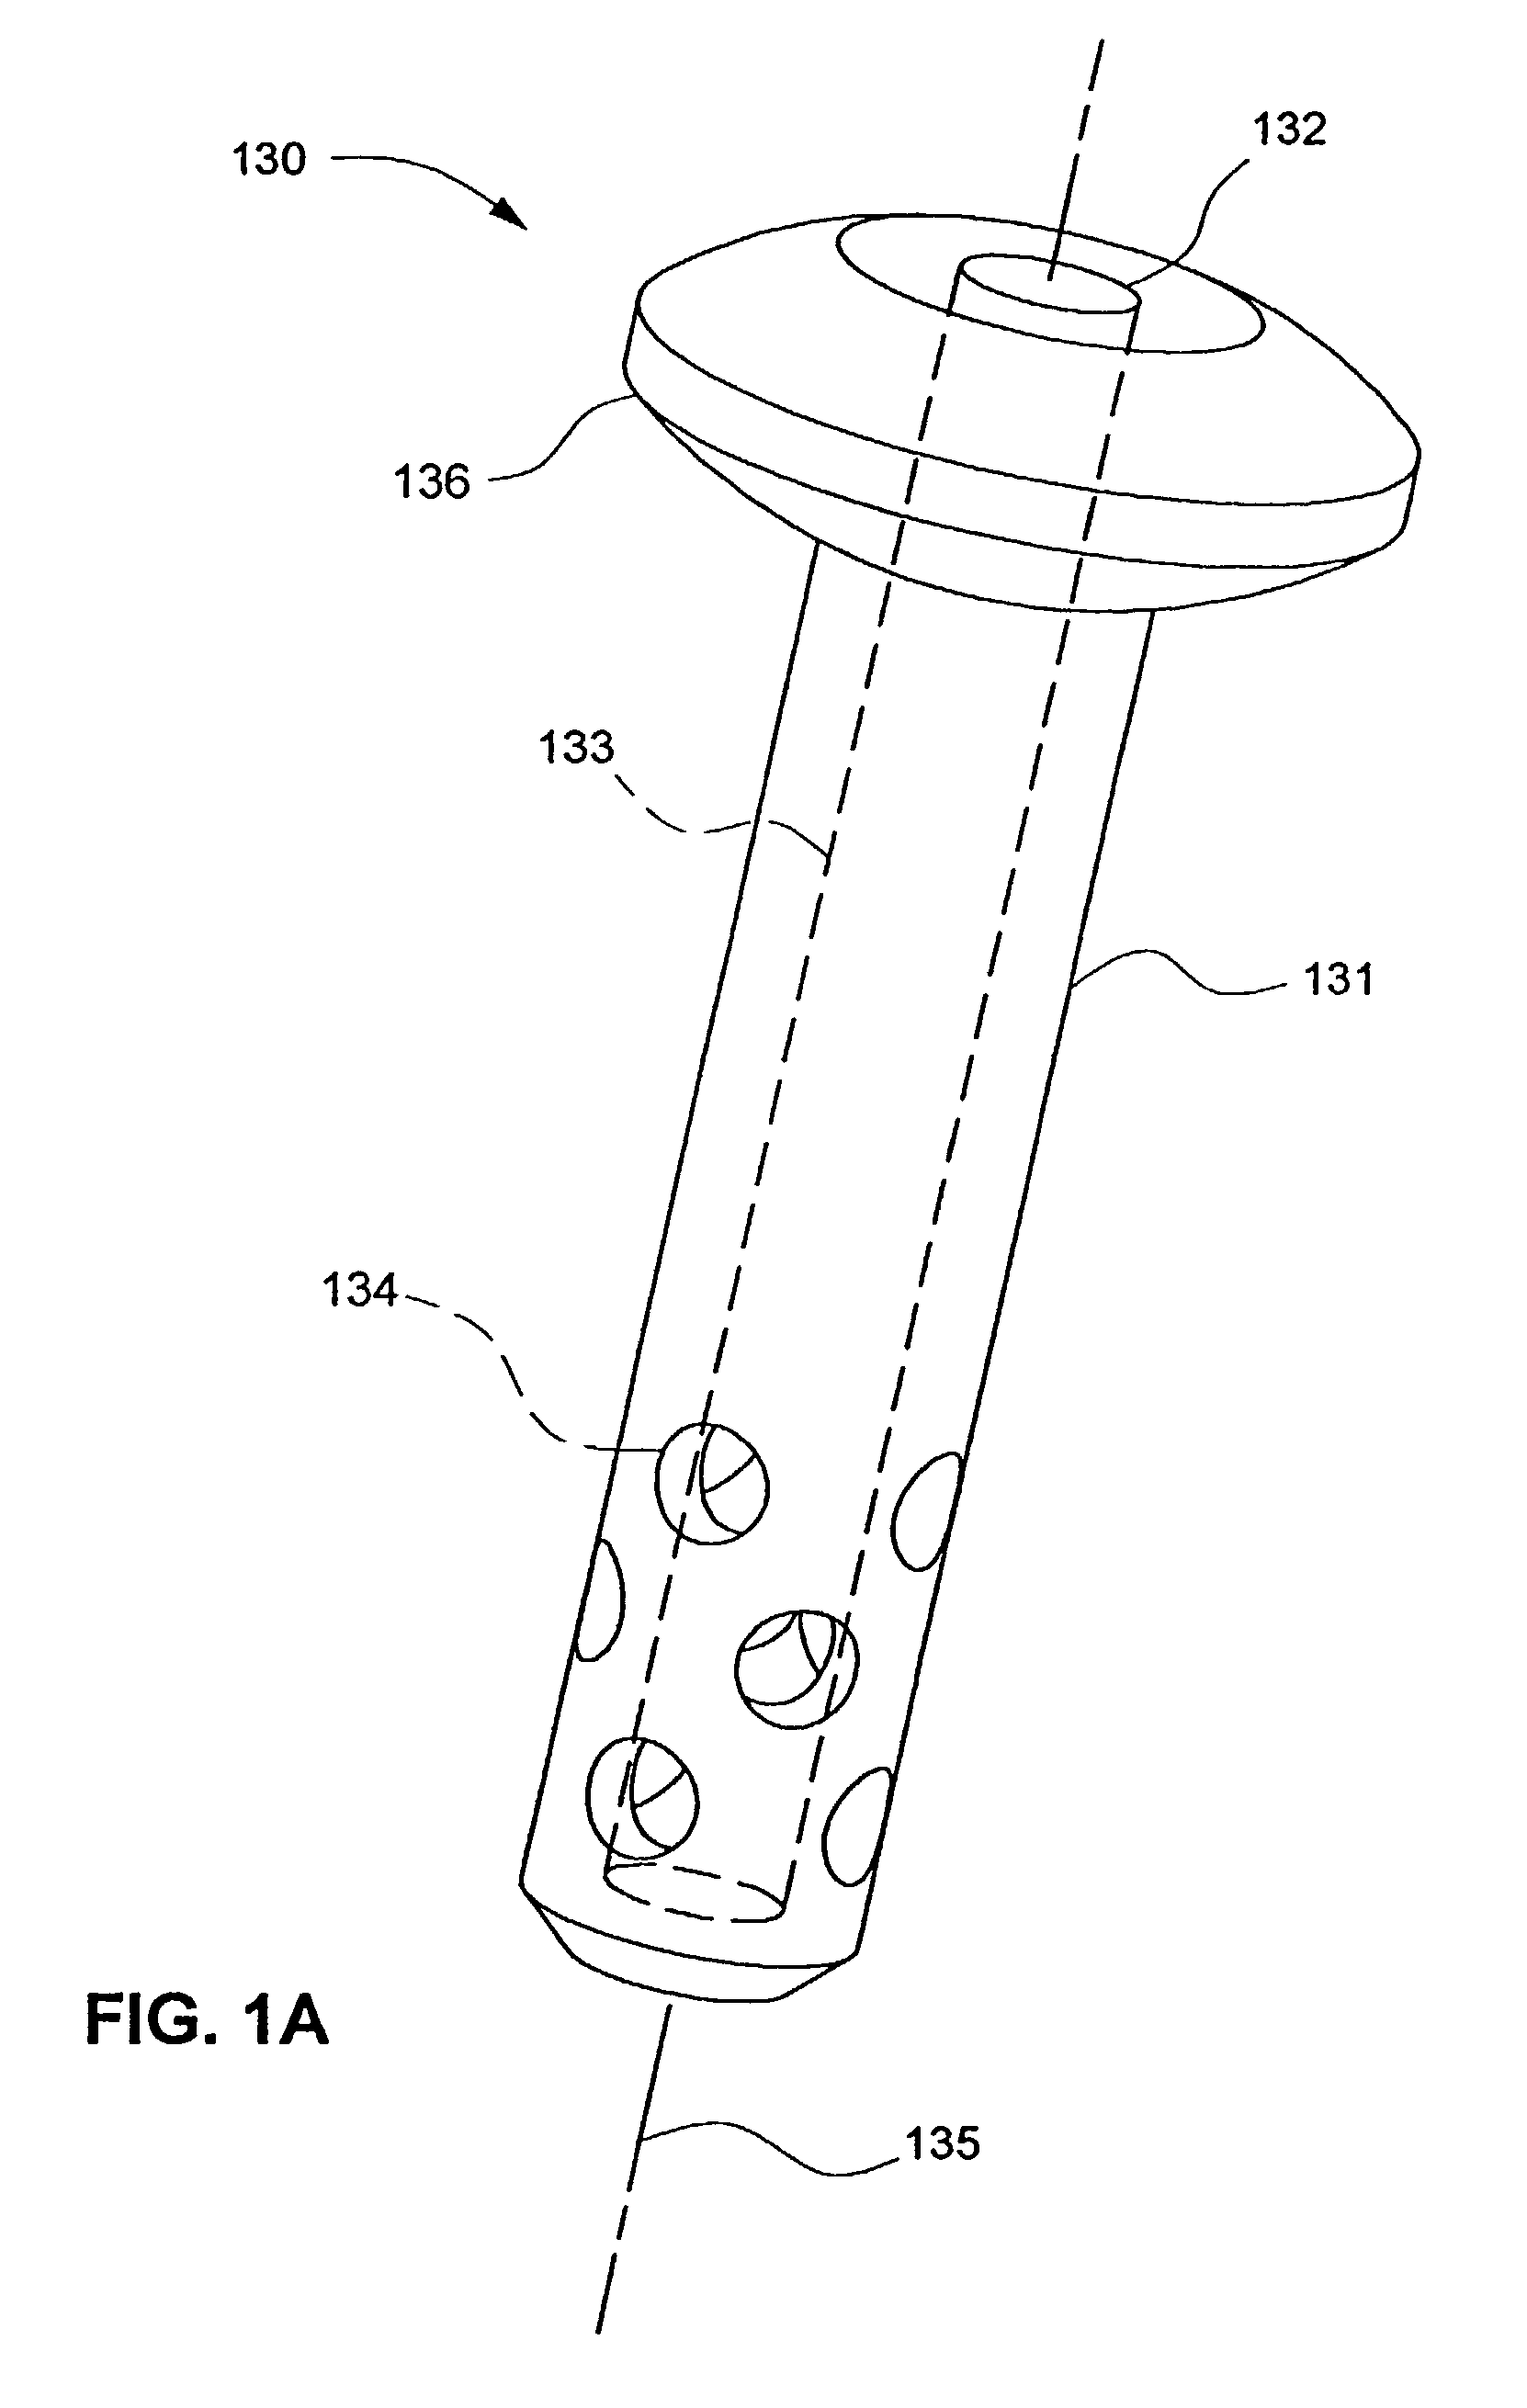 Orthopaedic implant fixation using an in-situ formed anchor